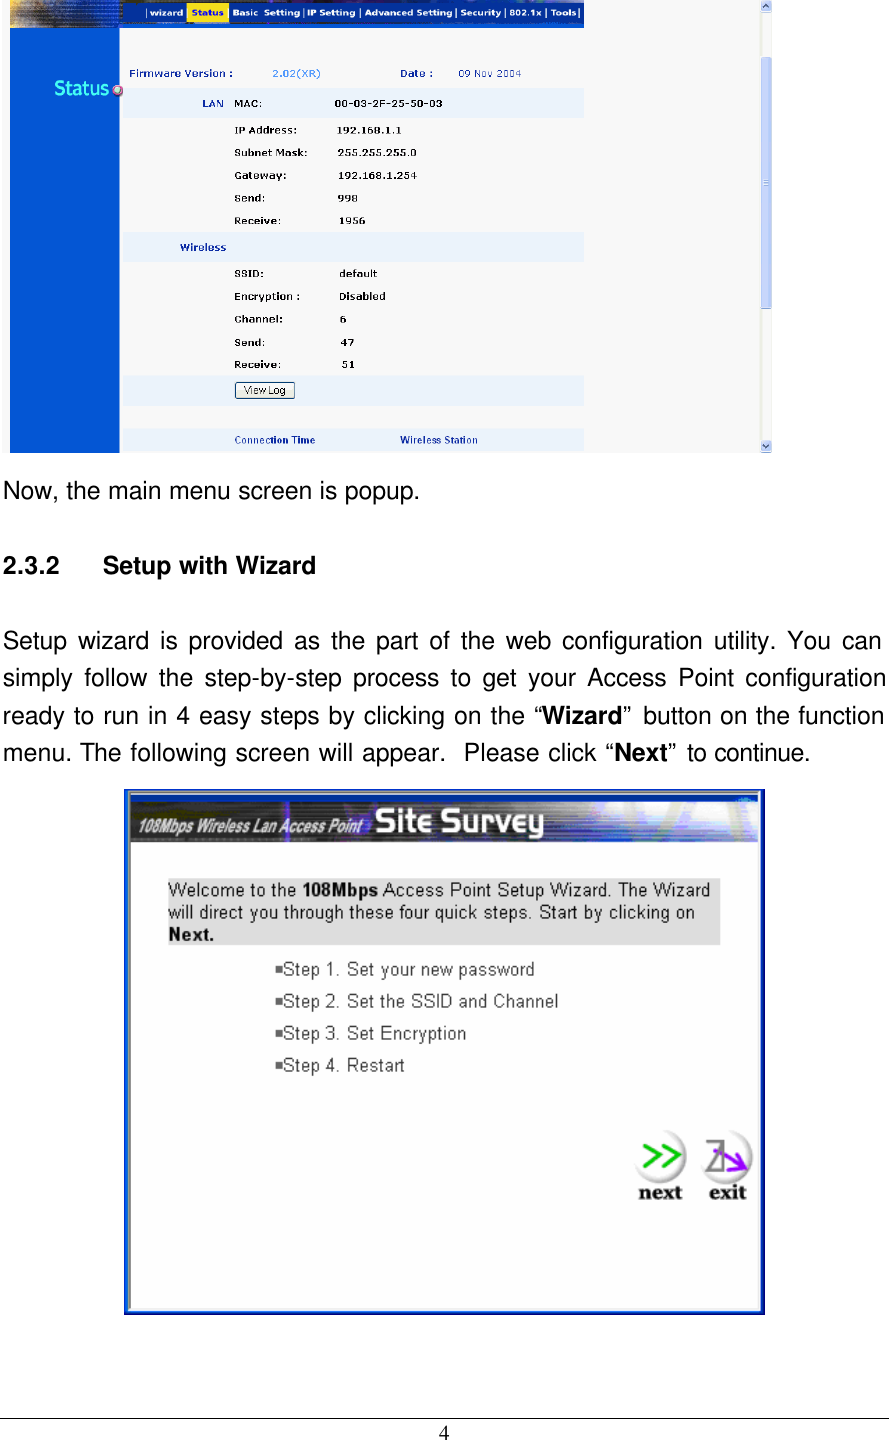 4   Now, the main menu screen is popup. 2.3.2 Setup with Wizard Setup wizard is provided as the part of the web configuration utility. You can simply follow the step-by-step process to get your Access Point configuration ready to run in 4 easy steps by clicking on the “Wizard” button on the function menu. The following screen will appear.  Please click “Next” to continue.  